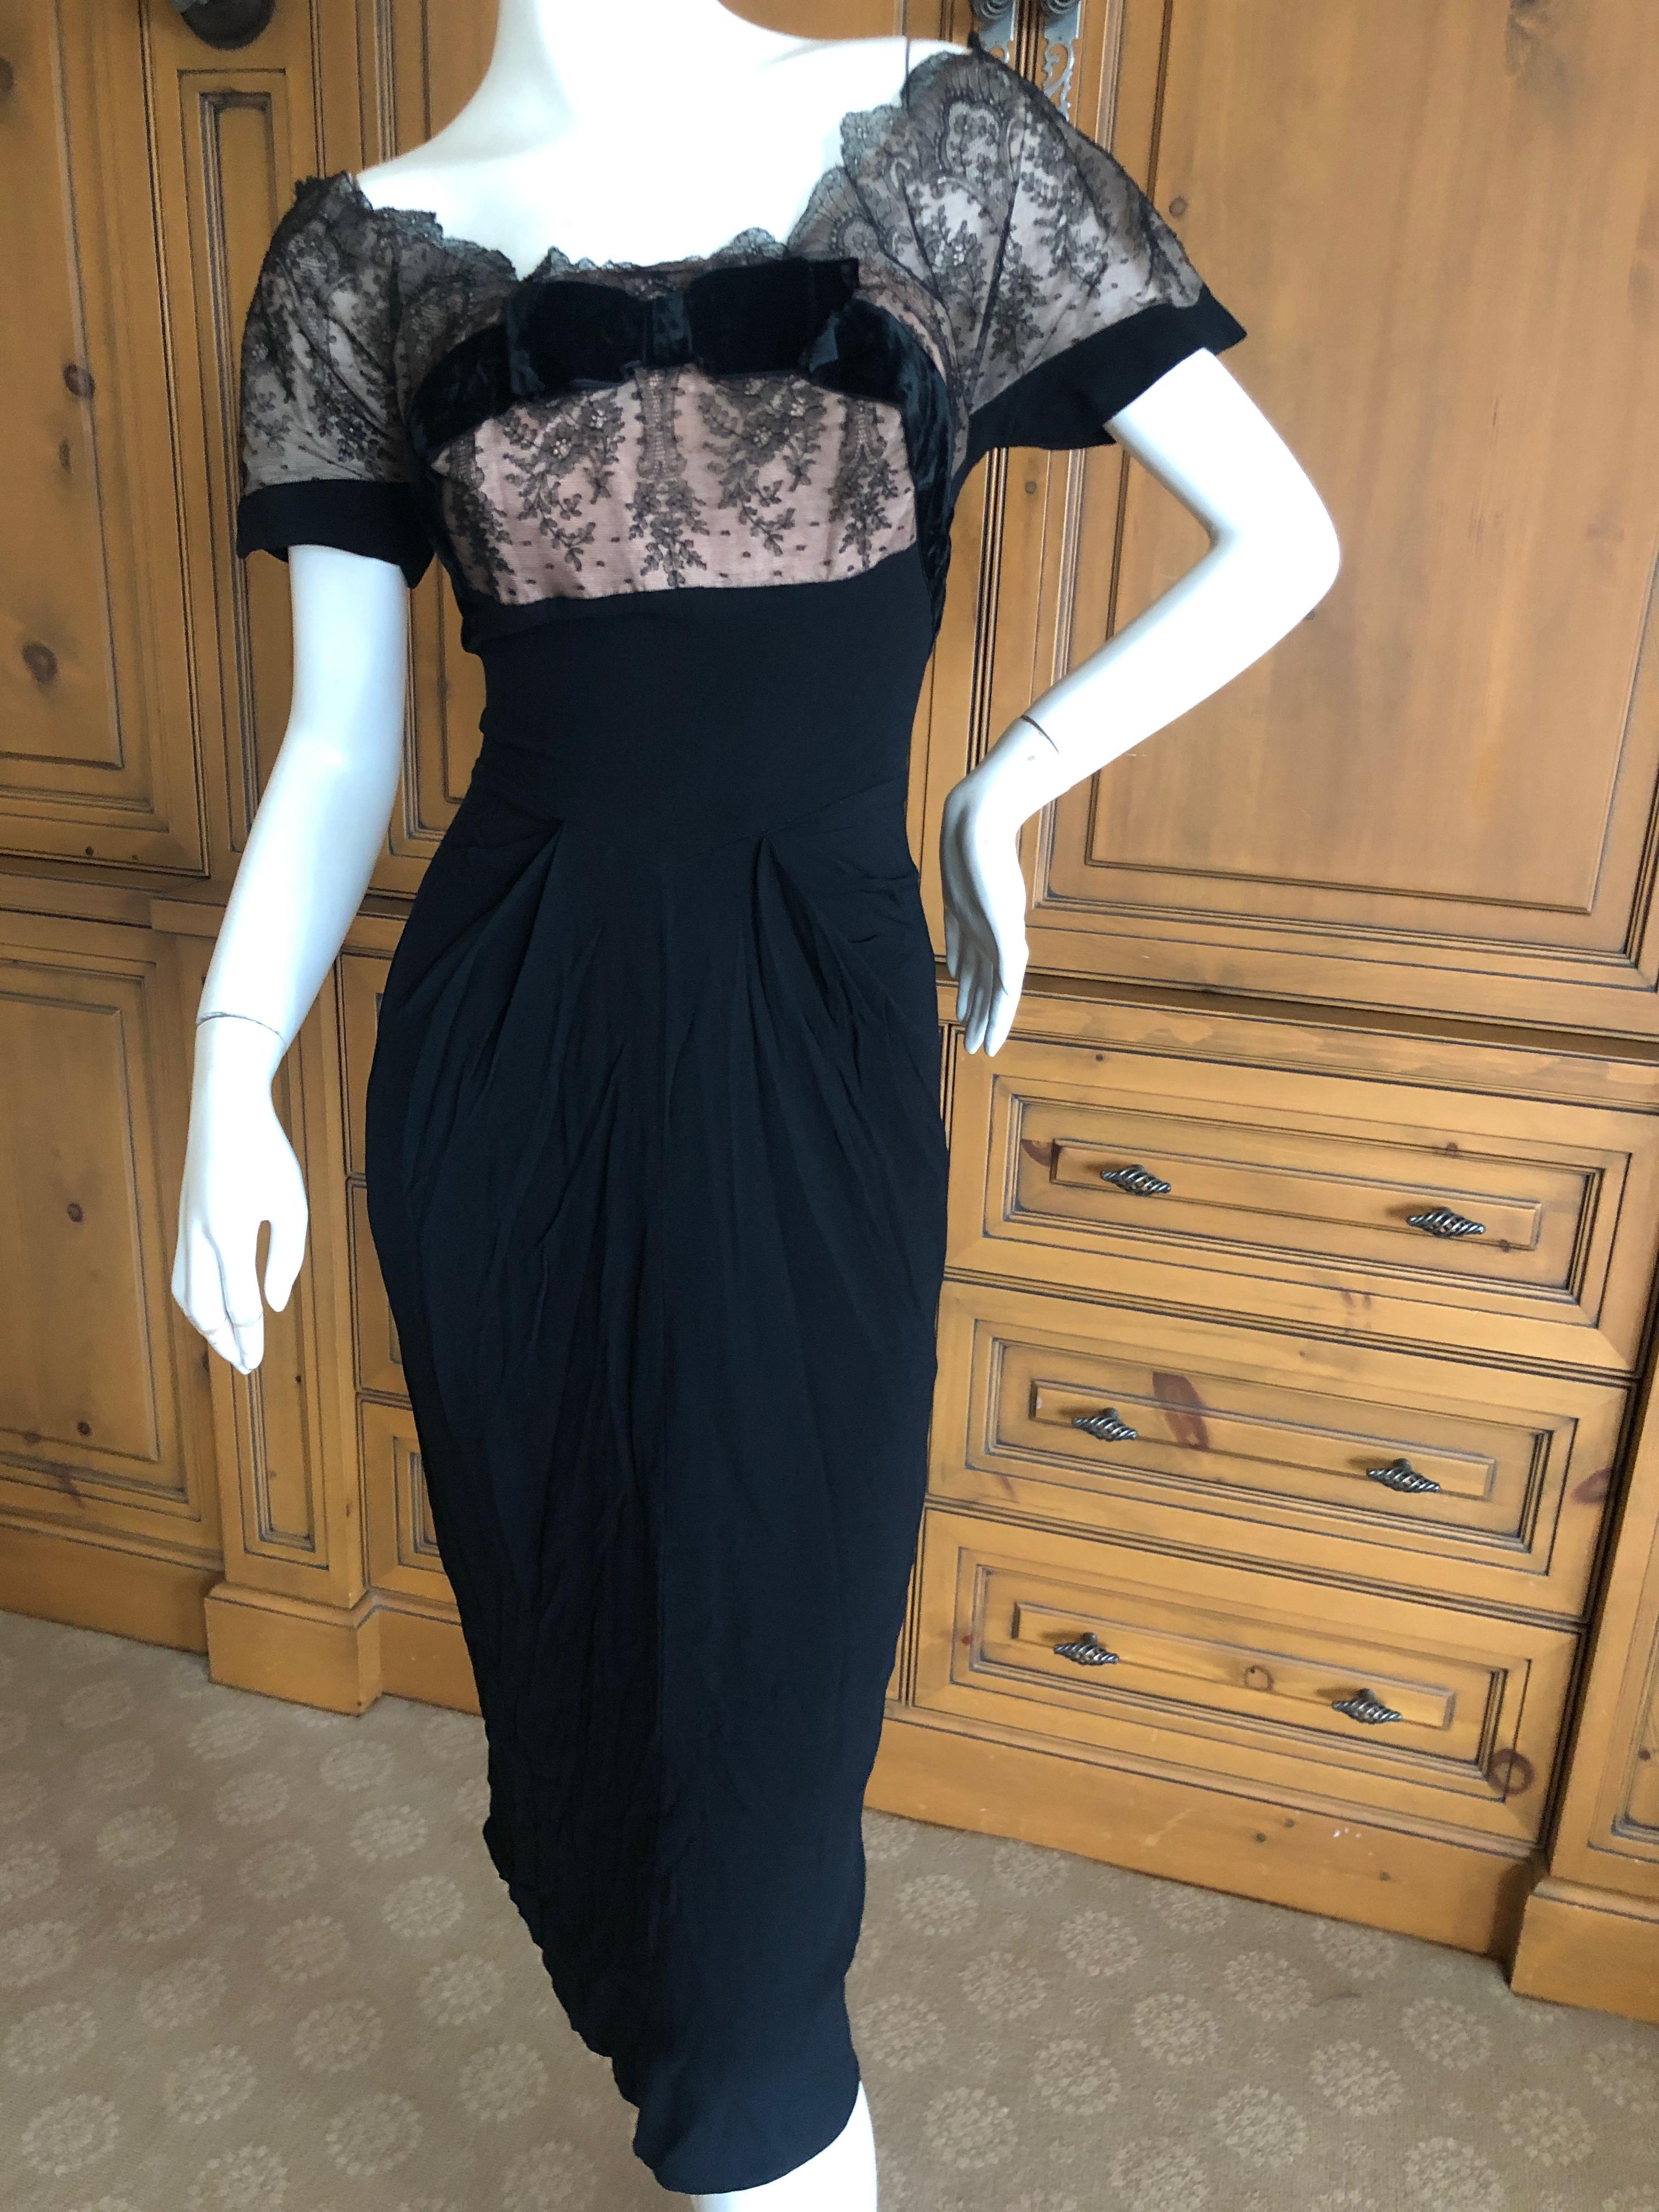 Dorothy O'Hara Hollywood Vintage 1950's Lace Cocktail Dress with Velvet Trim.
O'Hara was a costume designer for Paramount Studios in Hollywood before starting her own dress line in the late 1940's. Known for only designing dresses, no separates and